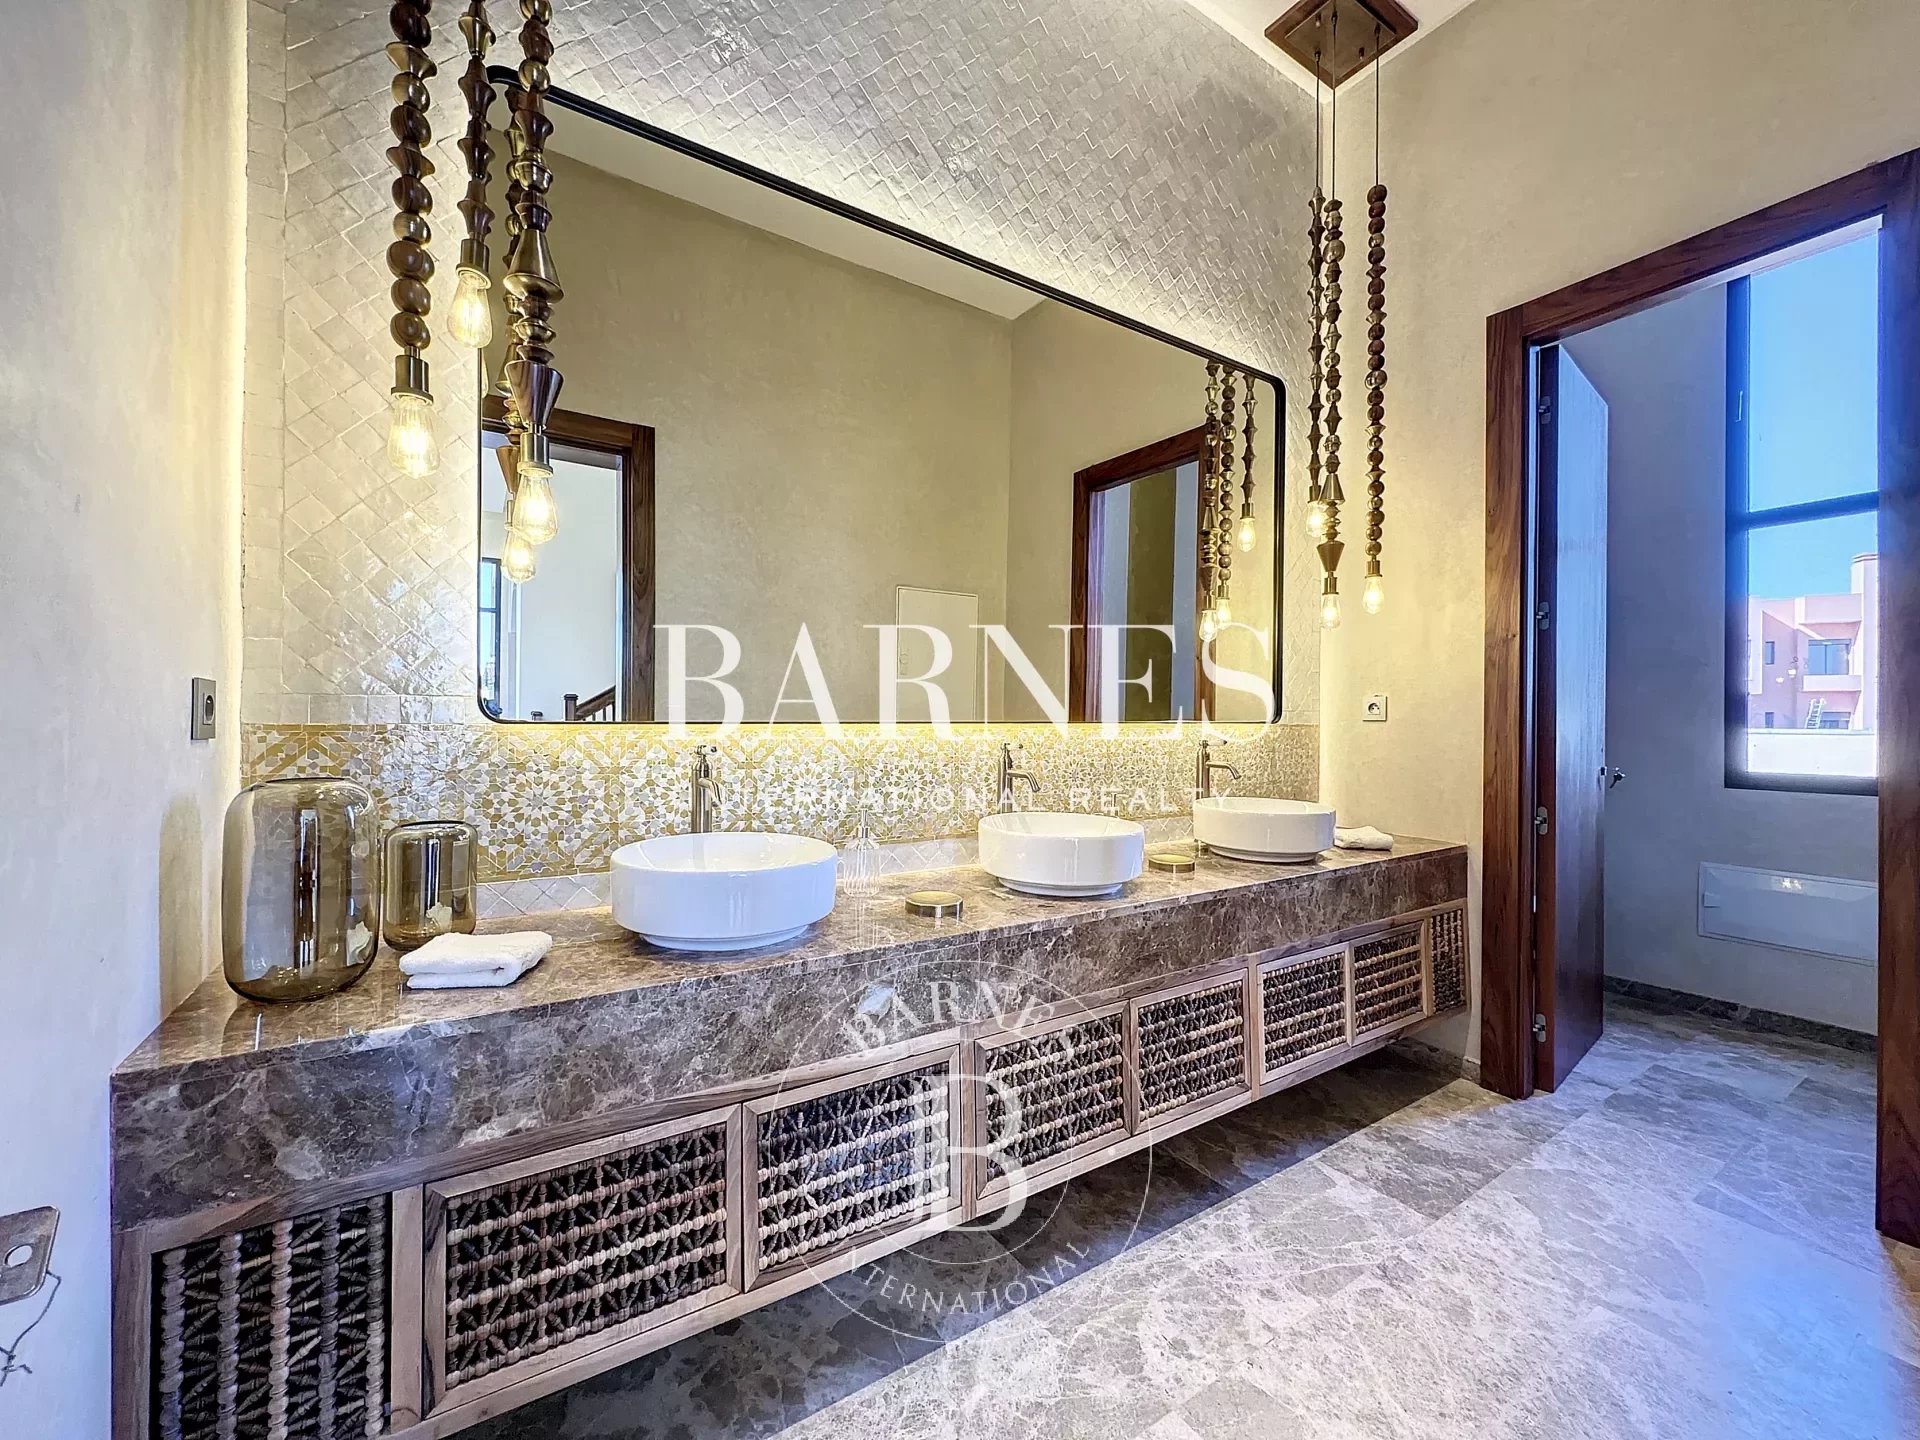 4-suite villa with a refined Moroccan style, located directly on the golf course. - picture 8 title=